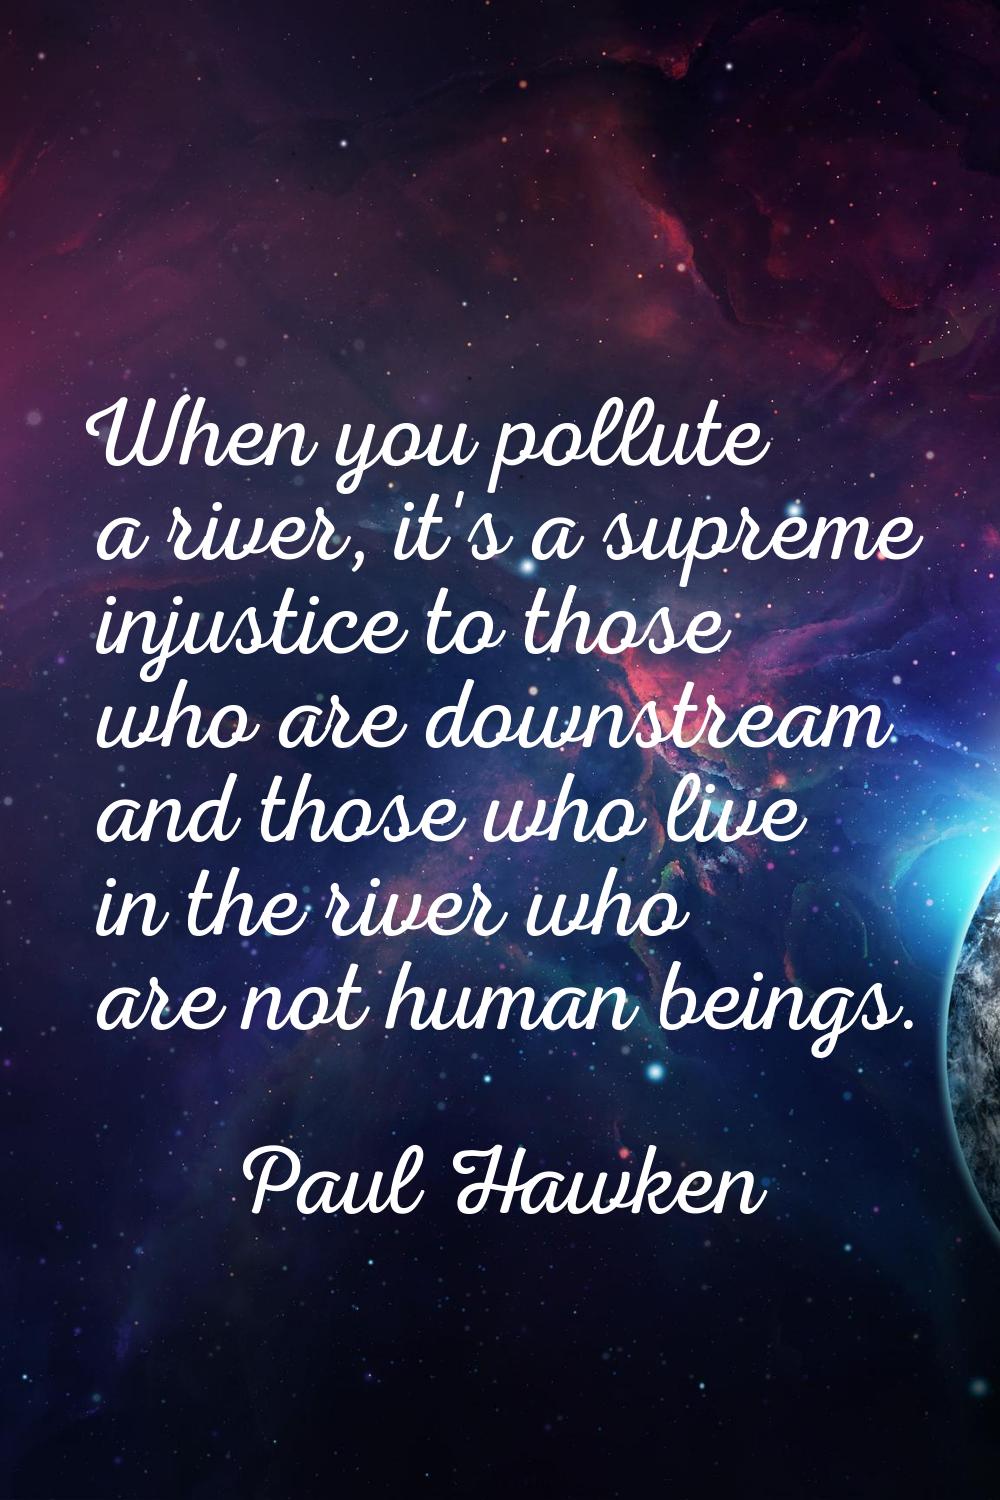 When you pollute a river, it's a supreme injustice to those who are downstream and those who live i